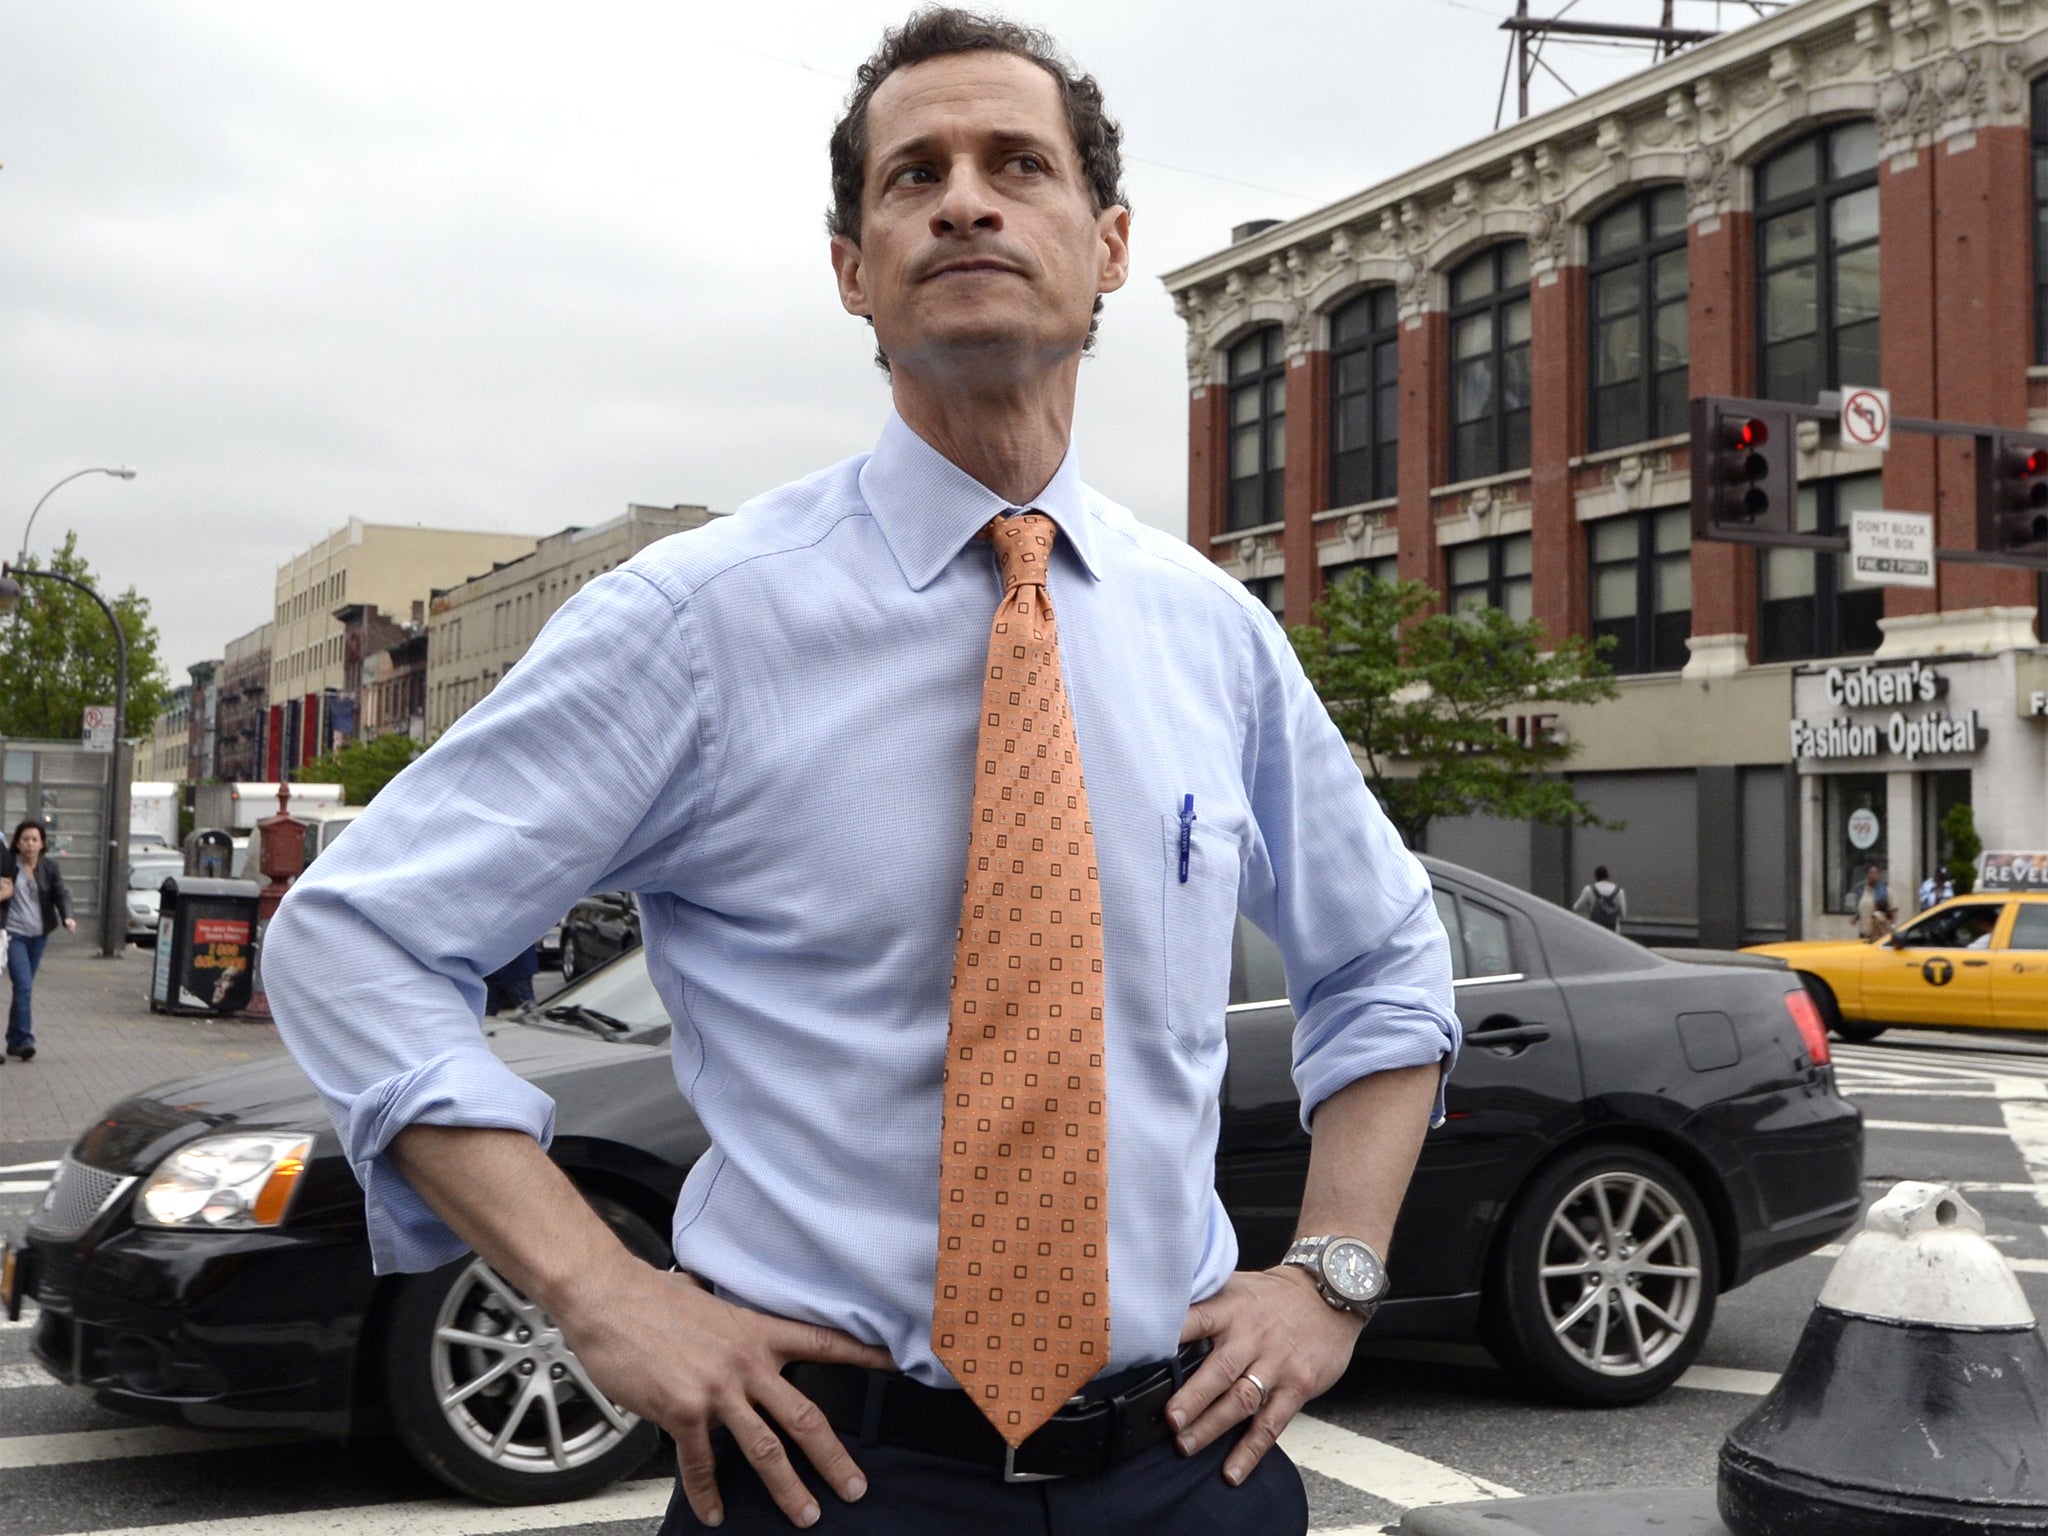 New York mayoral candidate, Anthony Wiener